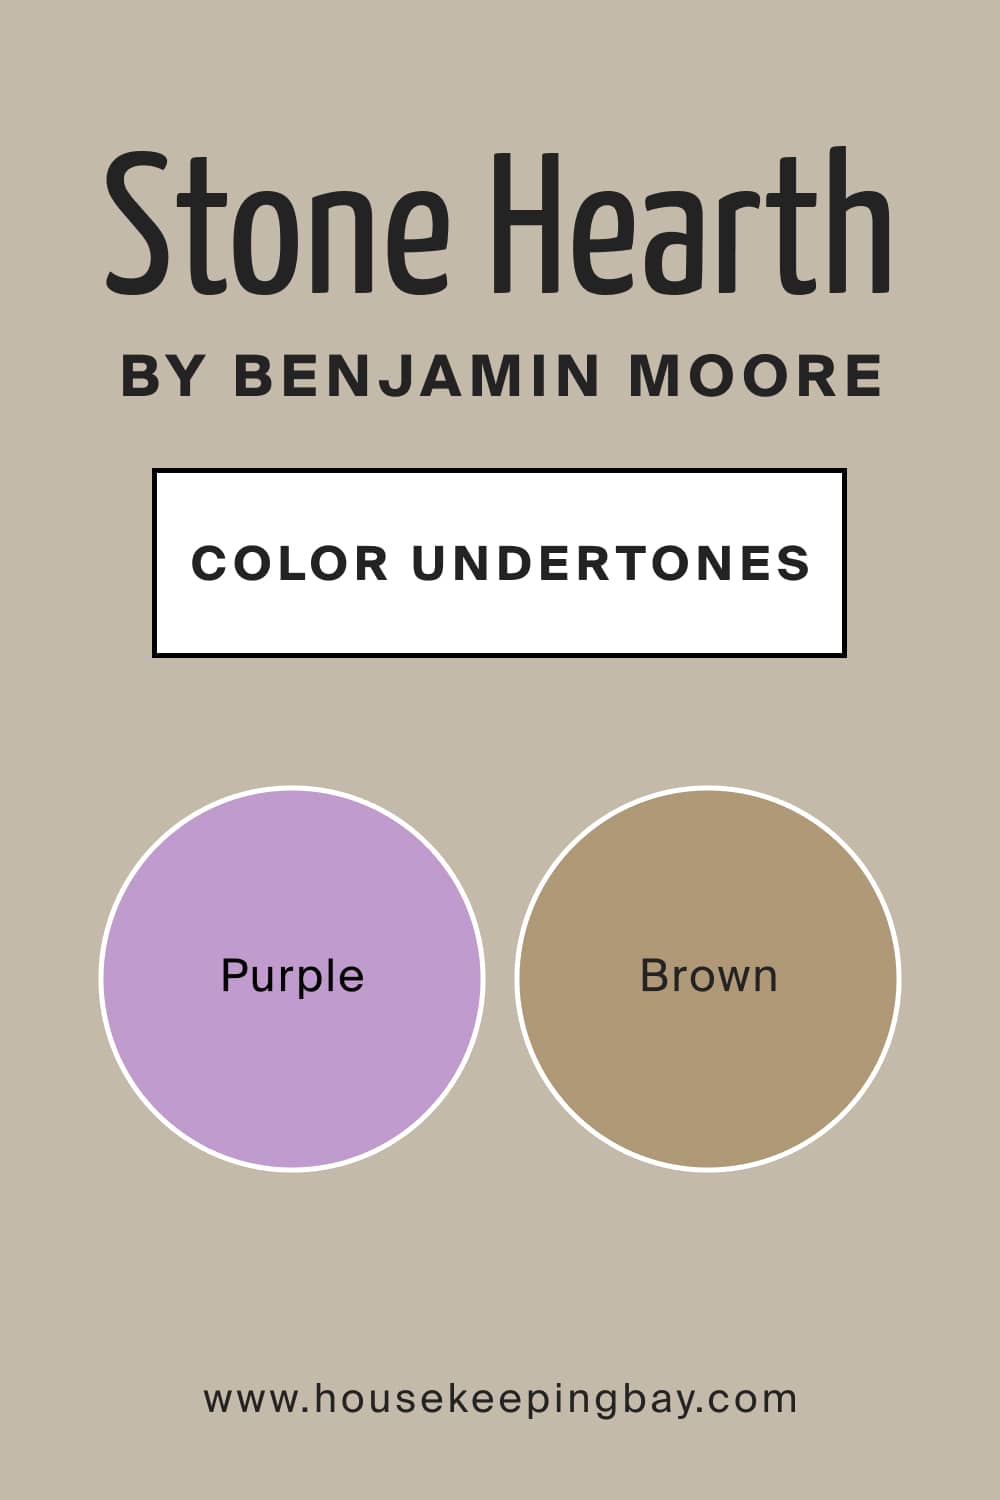 What Undertones Does Stone Hearth Paint Color Have